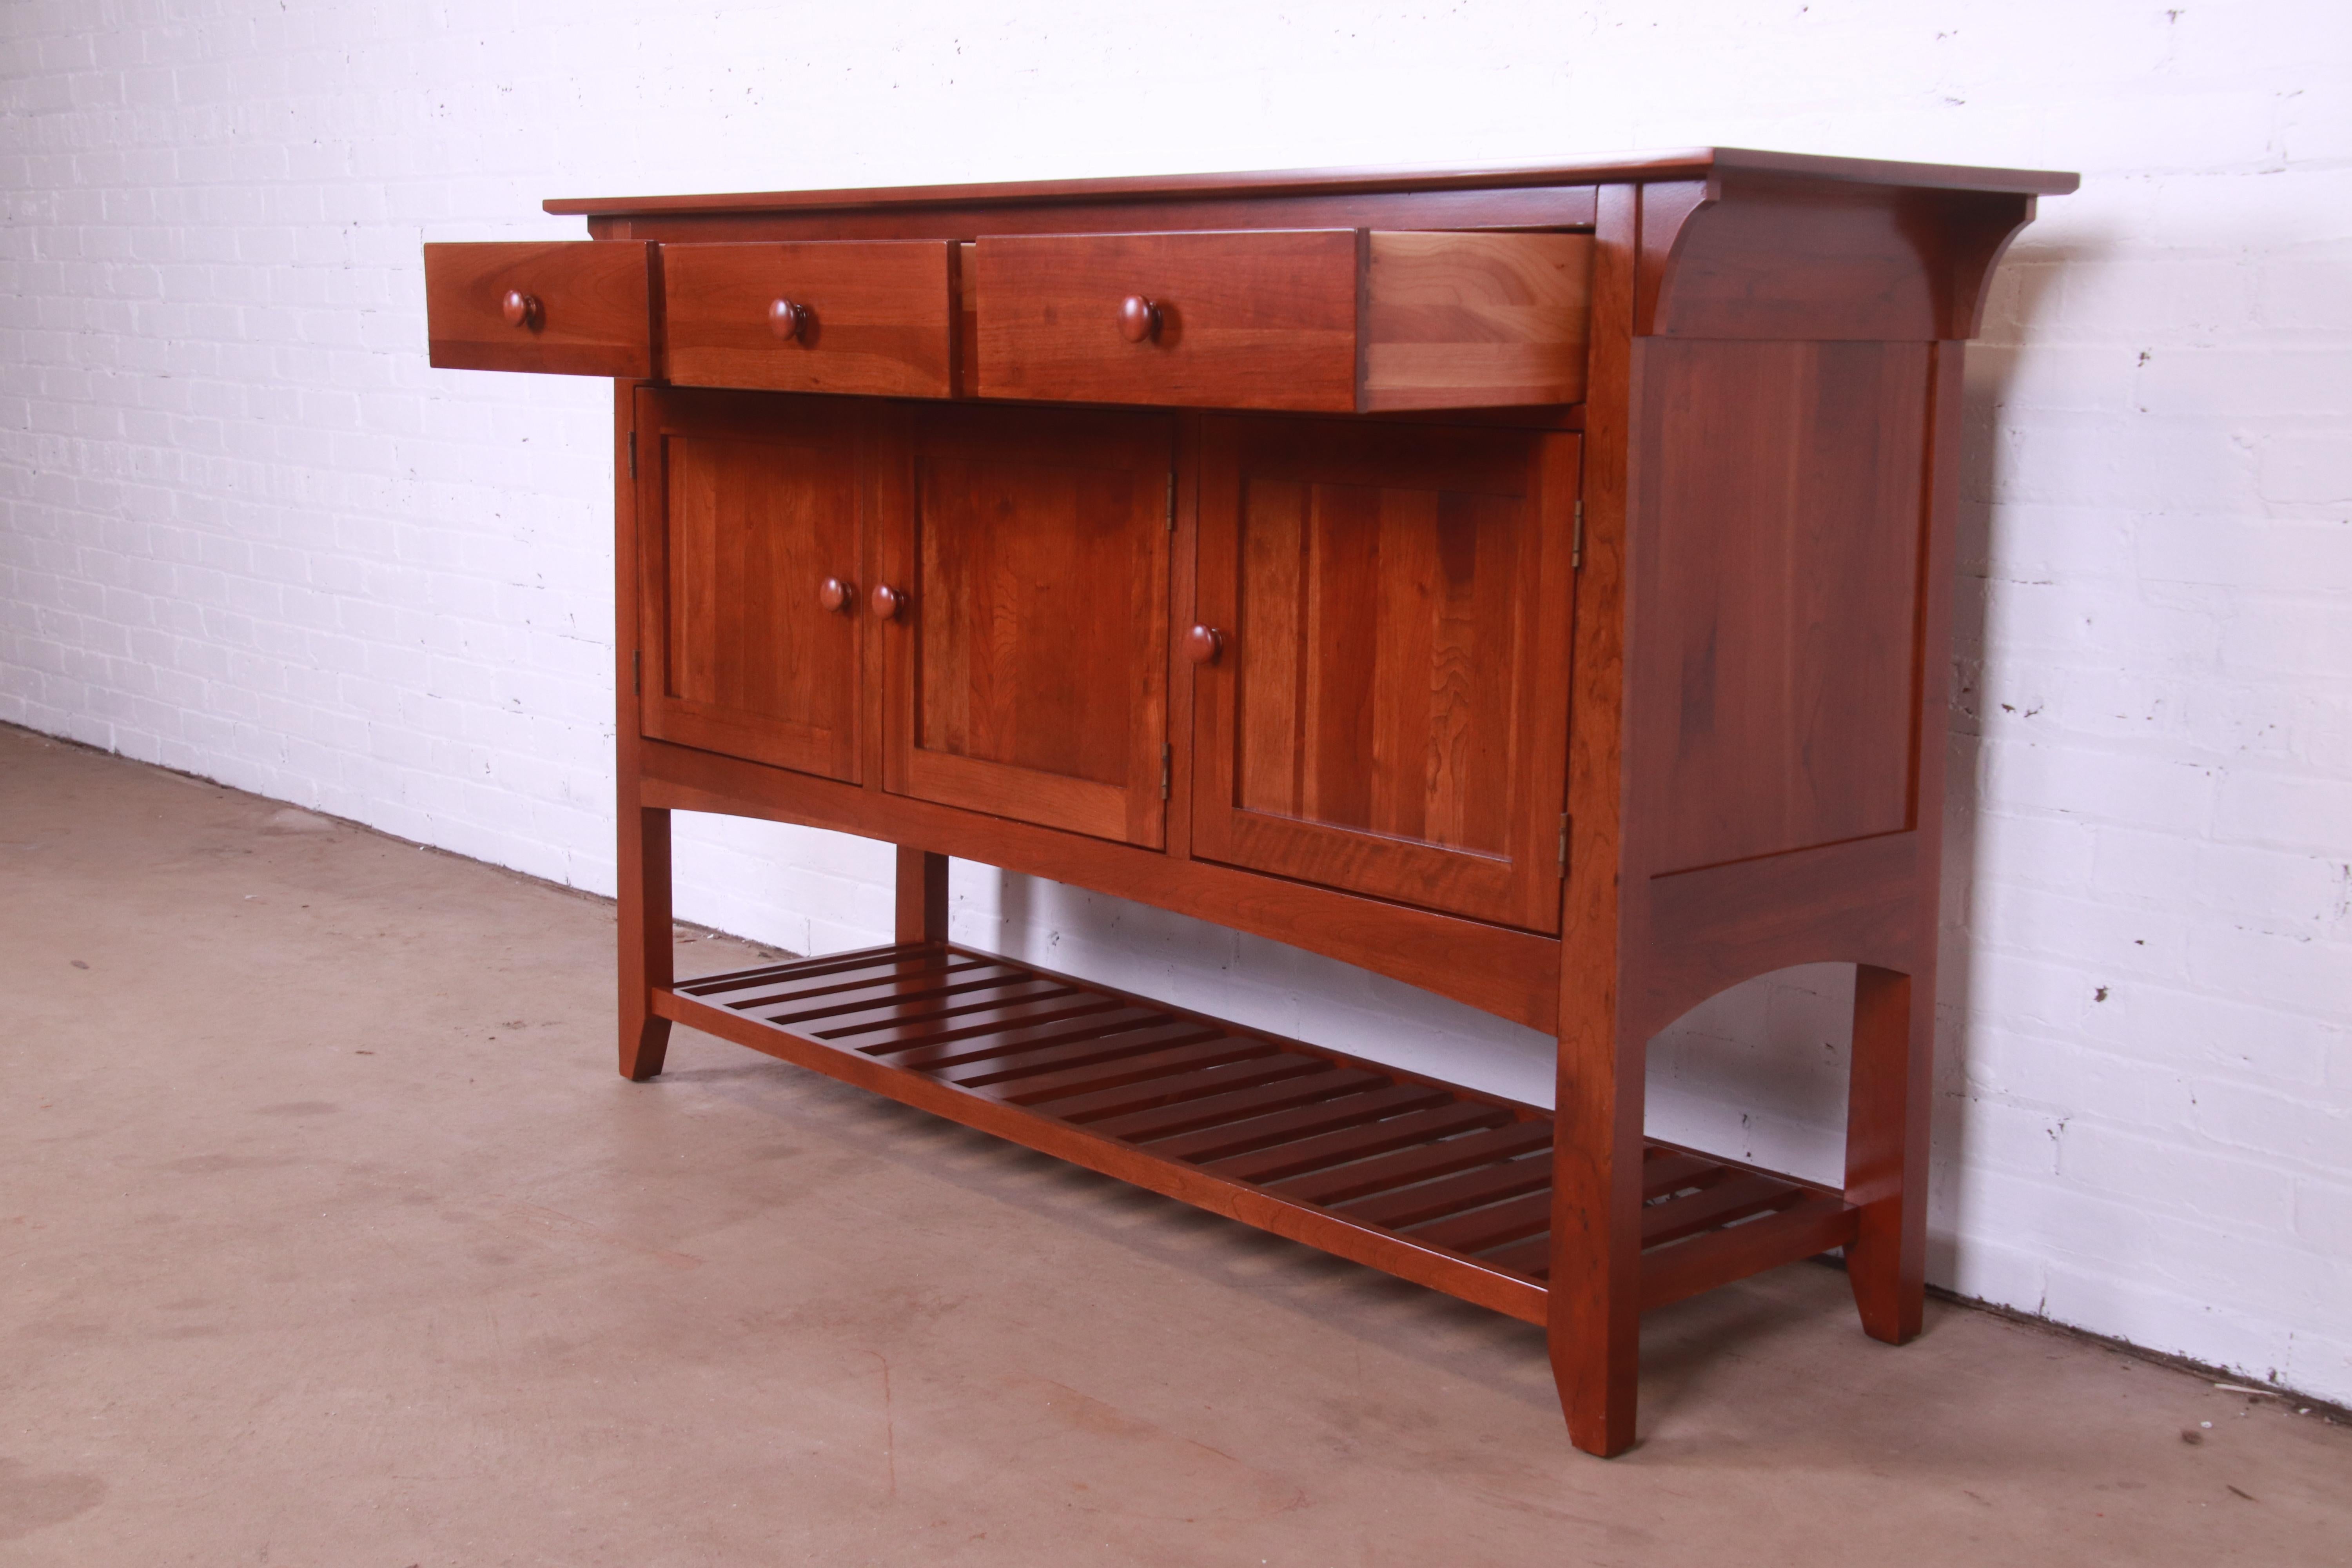 Ethan Allen Arts & Crafts Cherry Wood Sideboard or Bar Cabinet, Newly Refinished 3